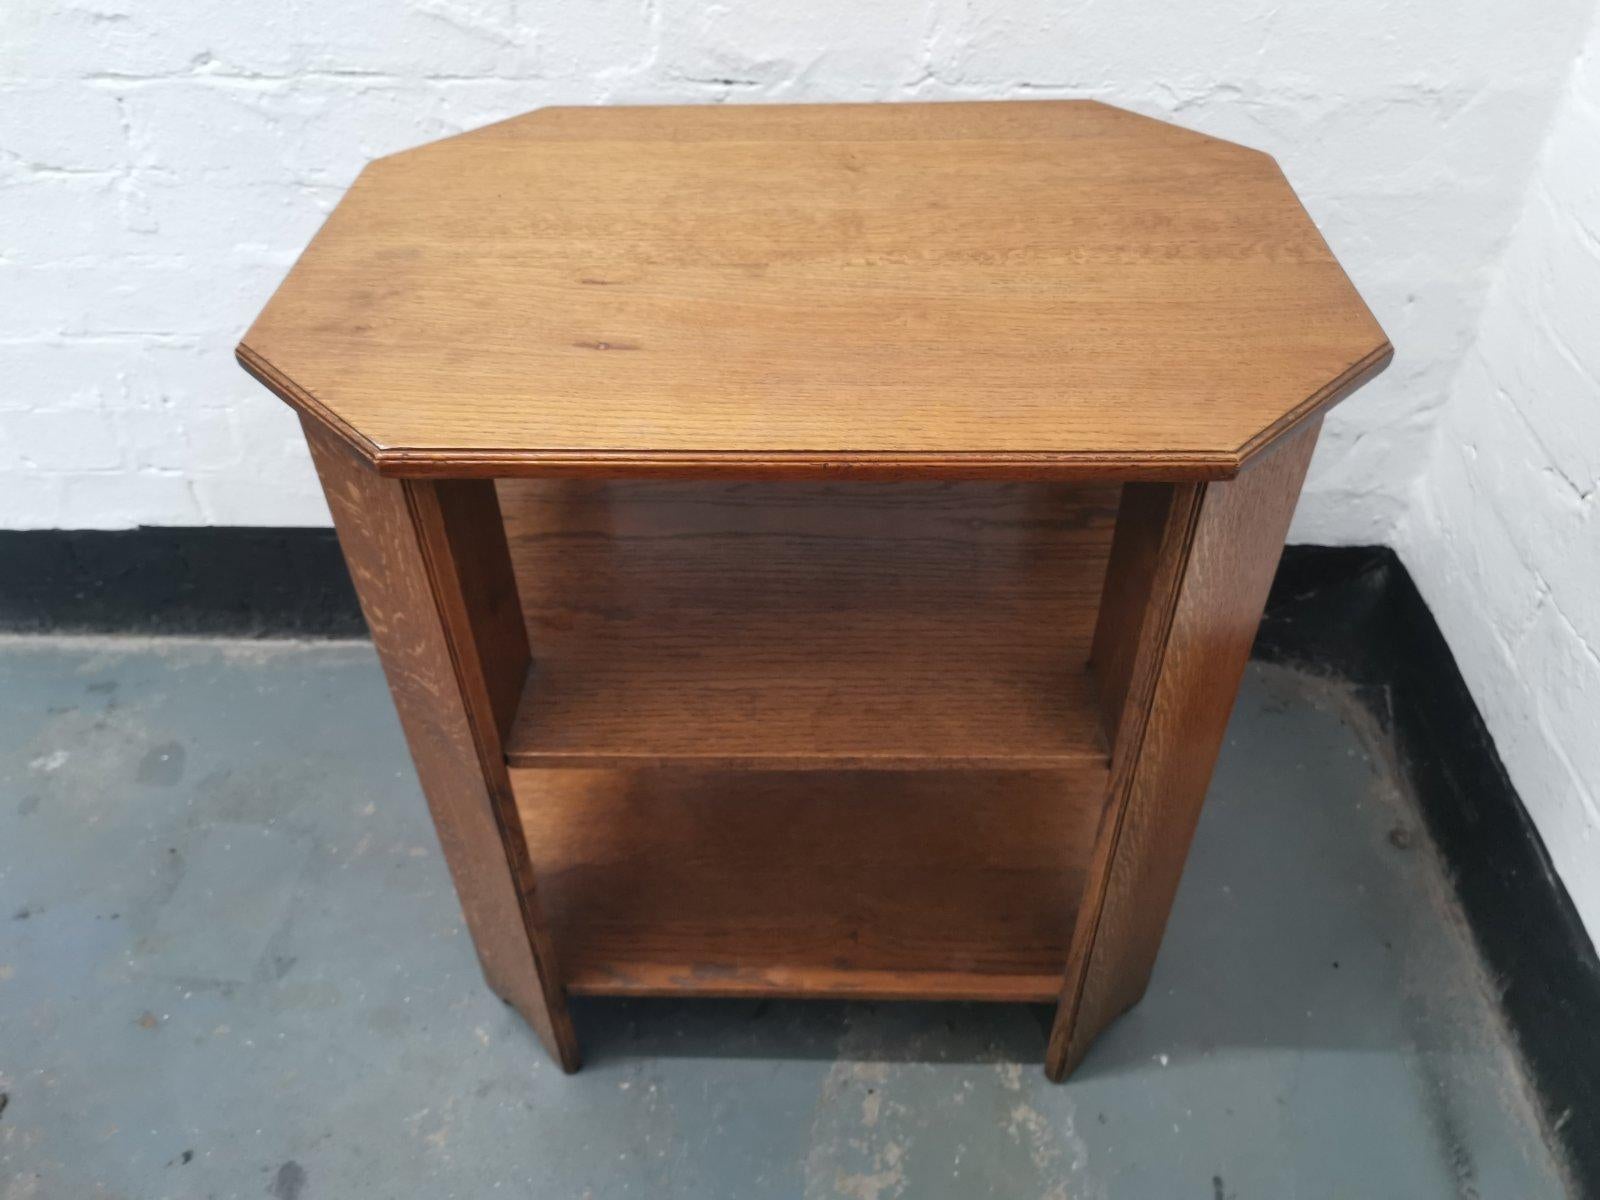 Heals and Son. 
An English Arts and Crafts oak side table with three tiers and canted corners with a nice wild figuring to the grain.